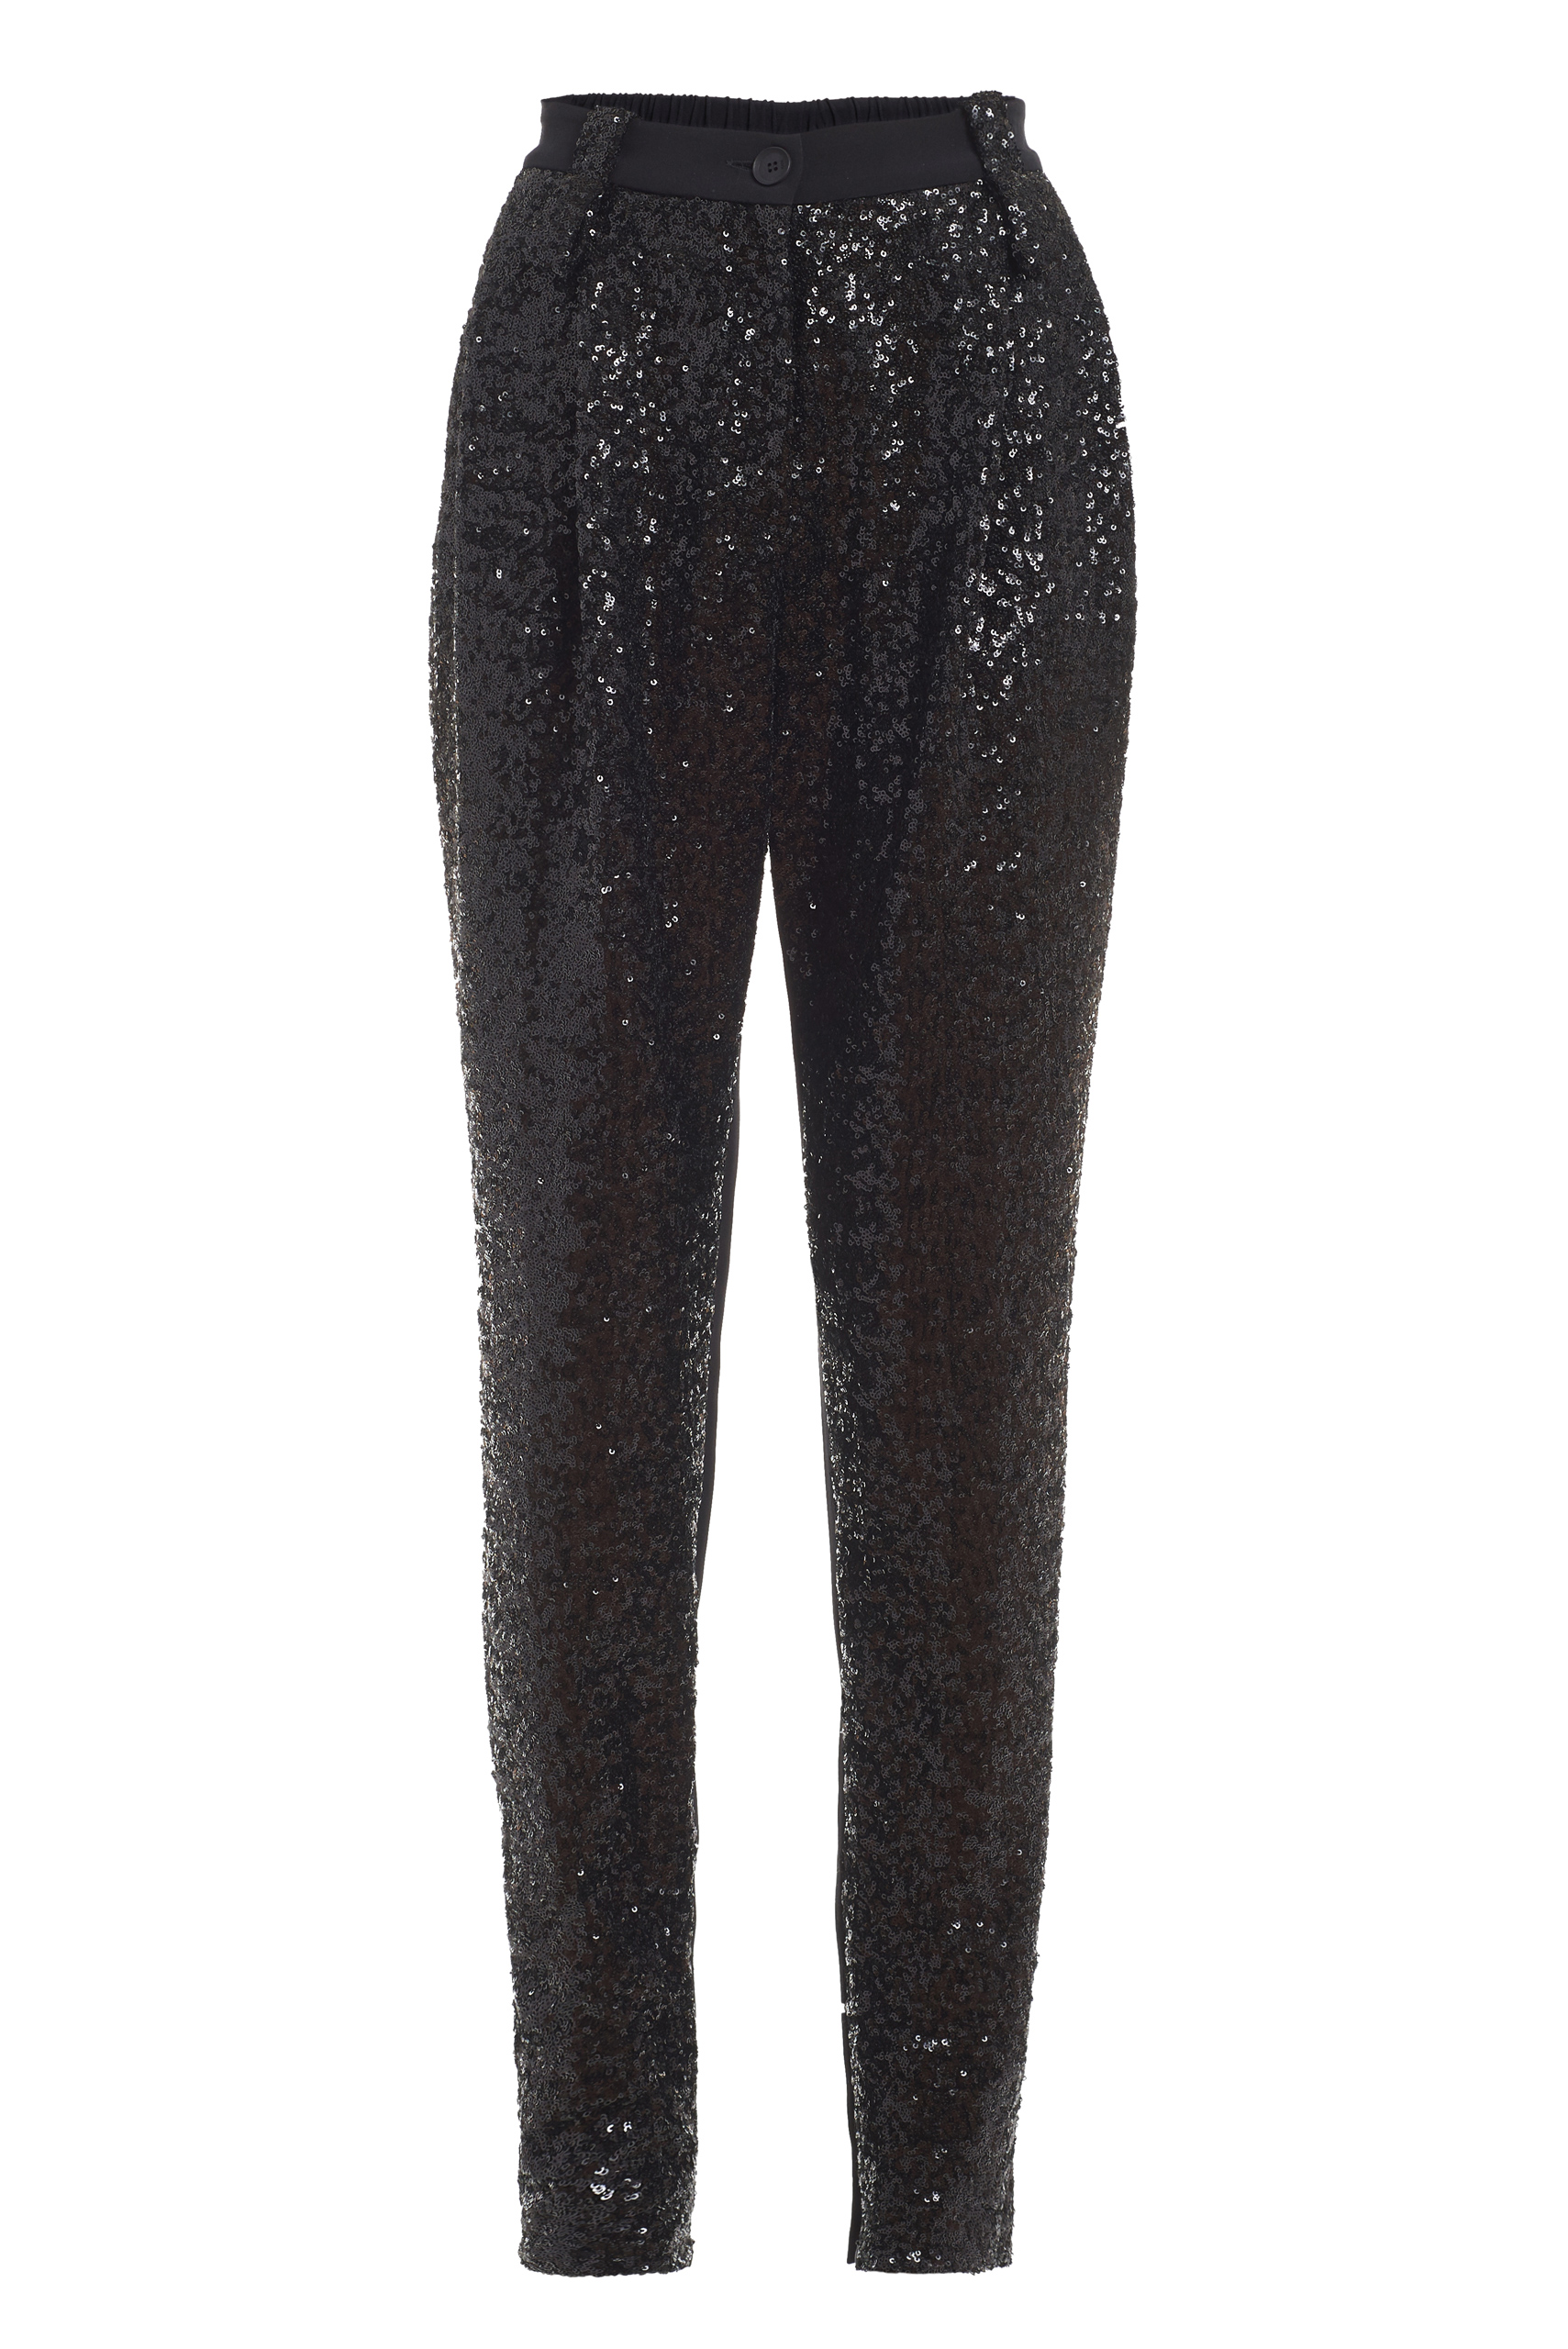 Silk and Sequin Trousers